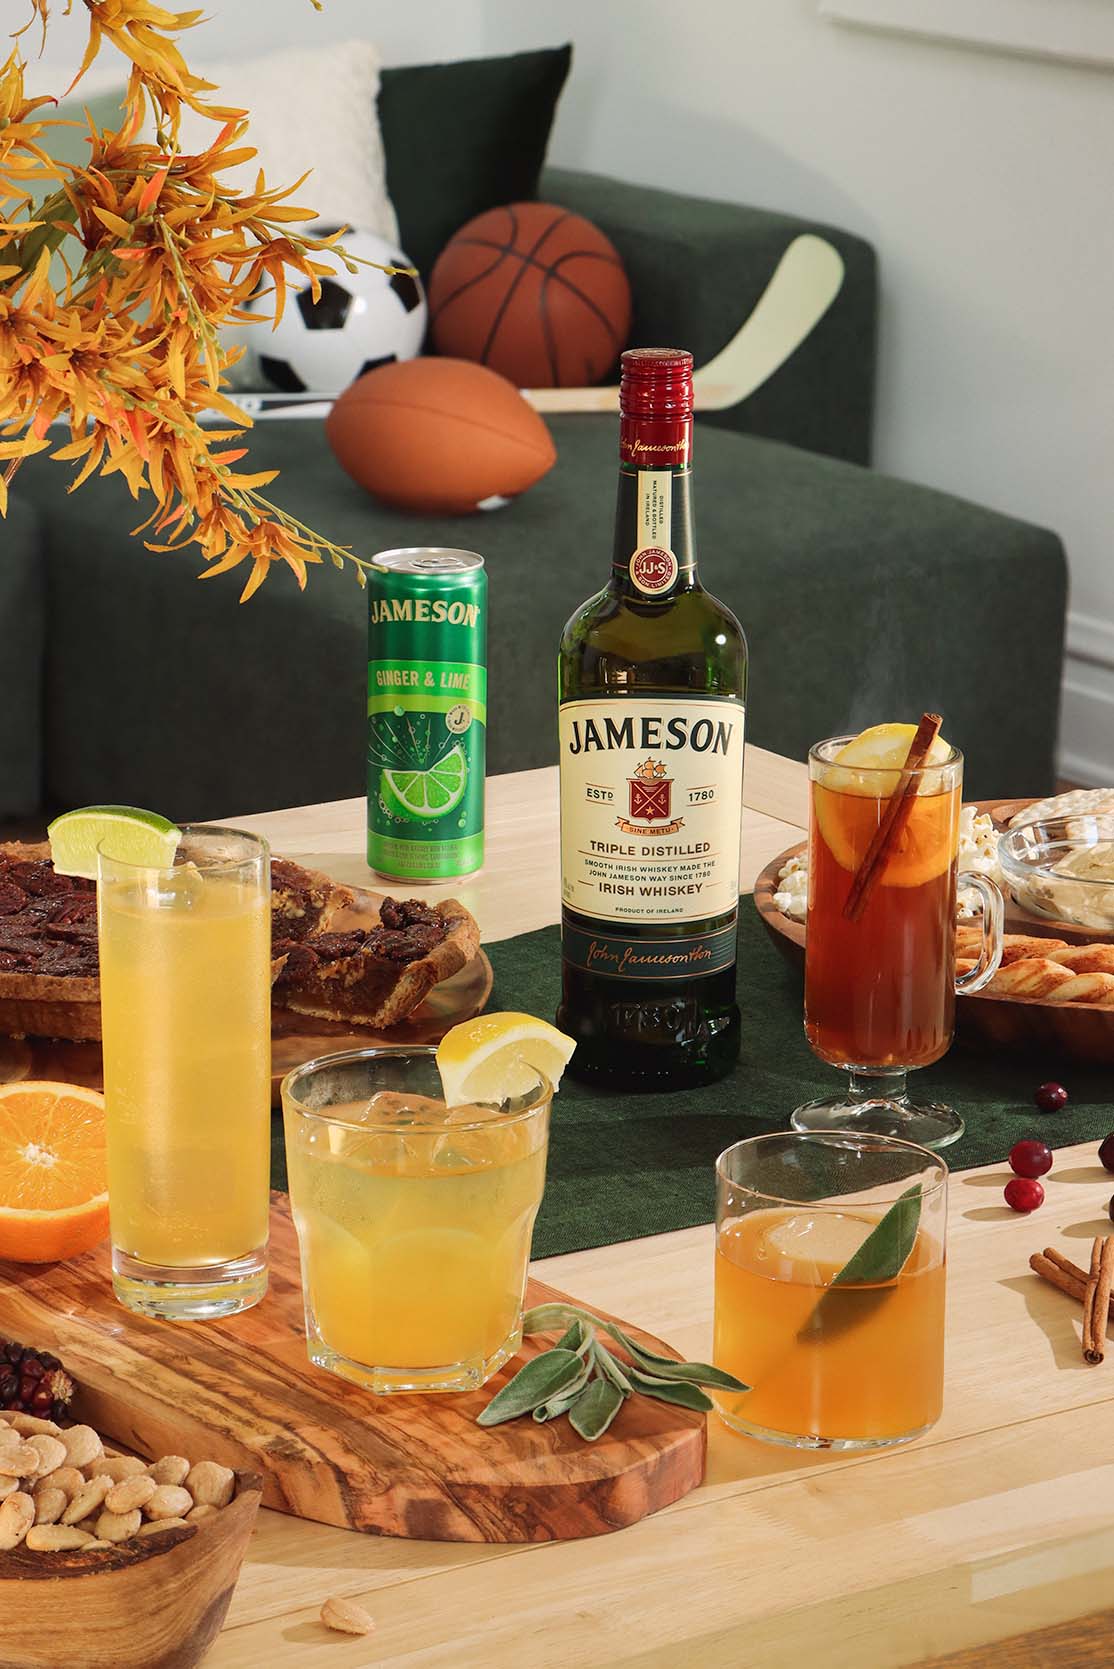 4 unique cocktails and the Jameson Original bottles surrounded by sports props.